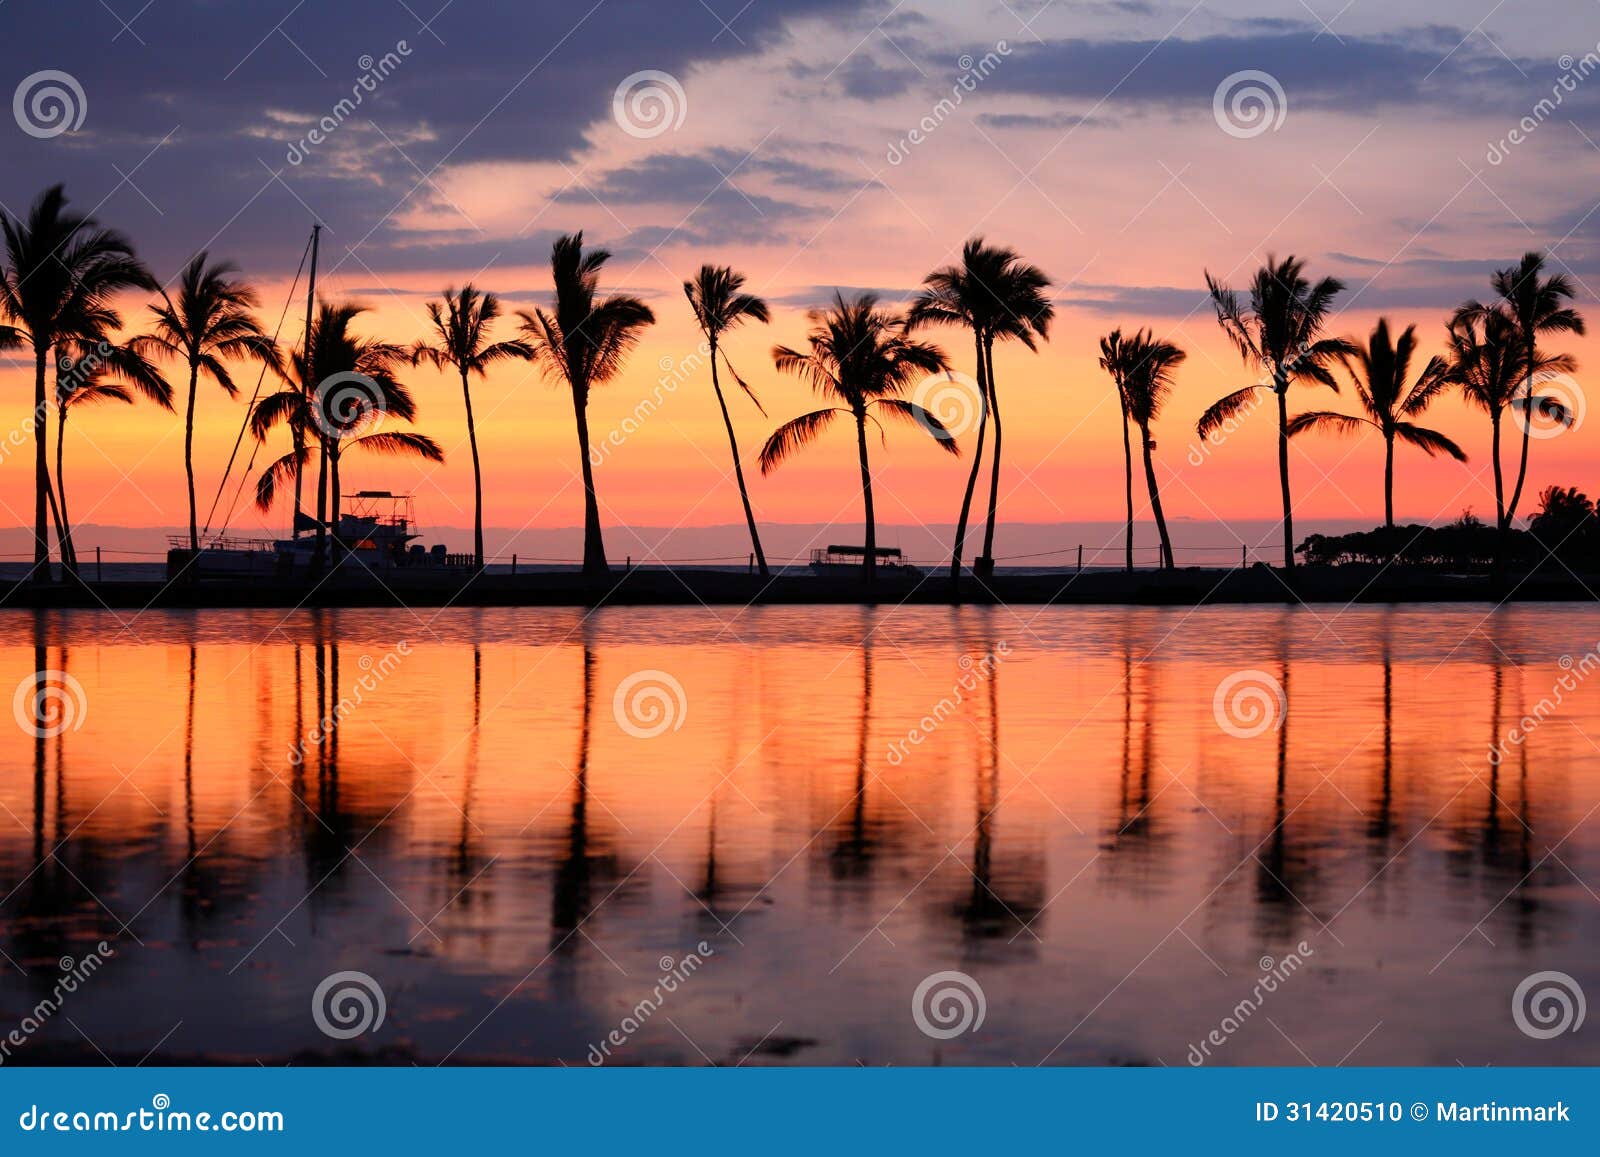 Sunrise On The Beach With Palm Trees